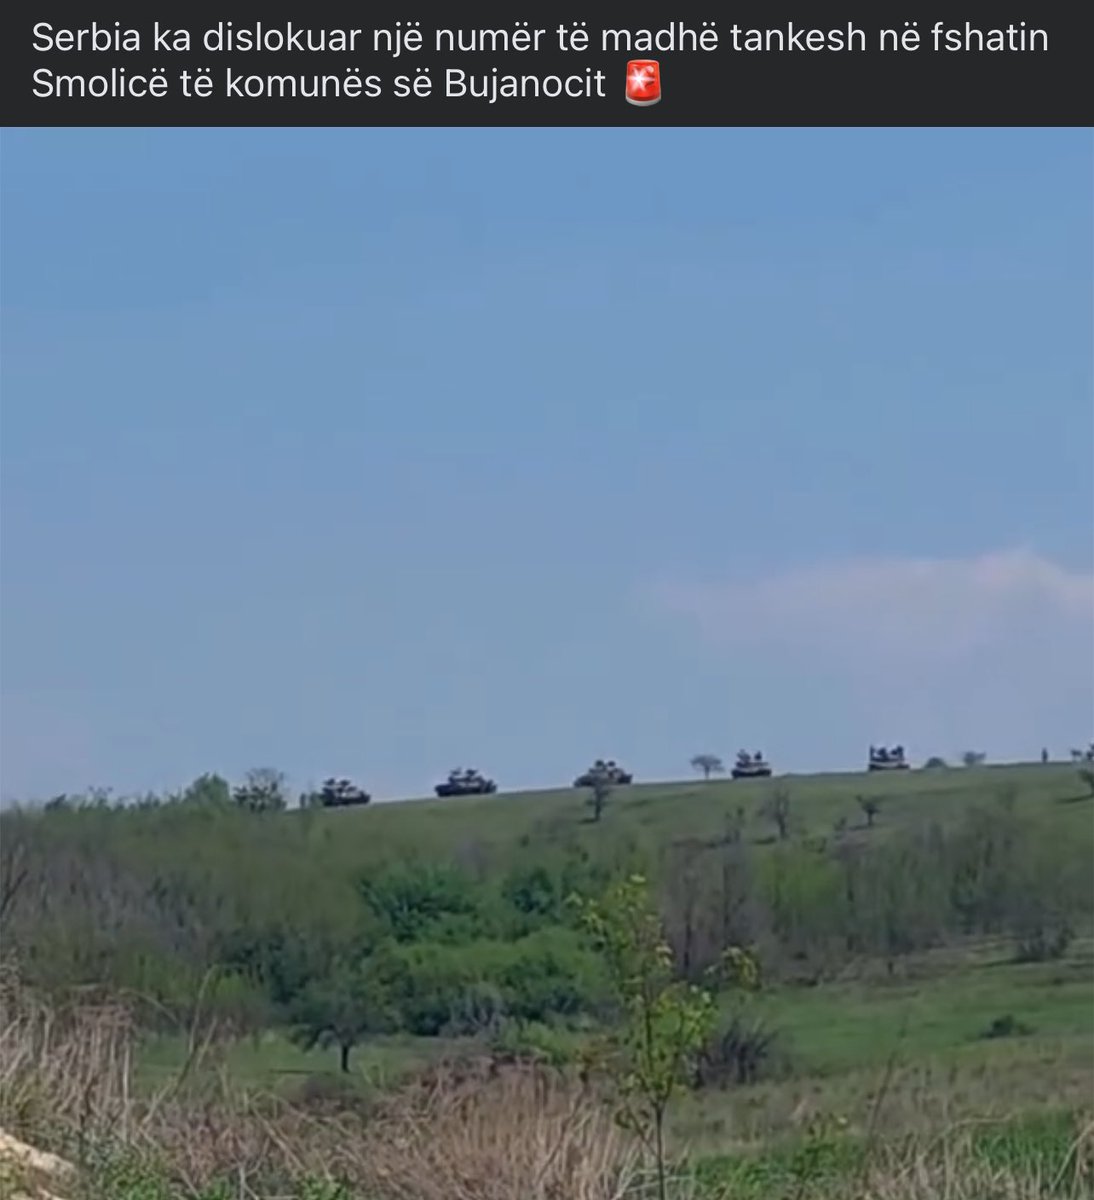 Today, the Serb army has deployed a large number of tanks in the village of Smolicë in the Municipality of Bujanoc, near Kosova. 

Serbs are playing with fire lately. #kosova